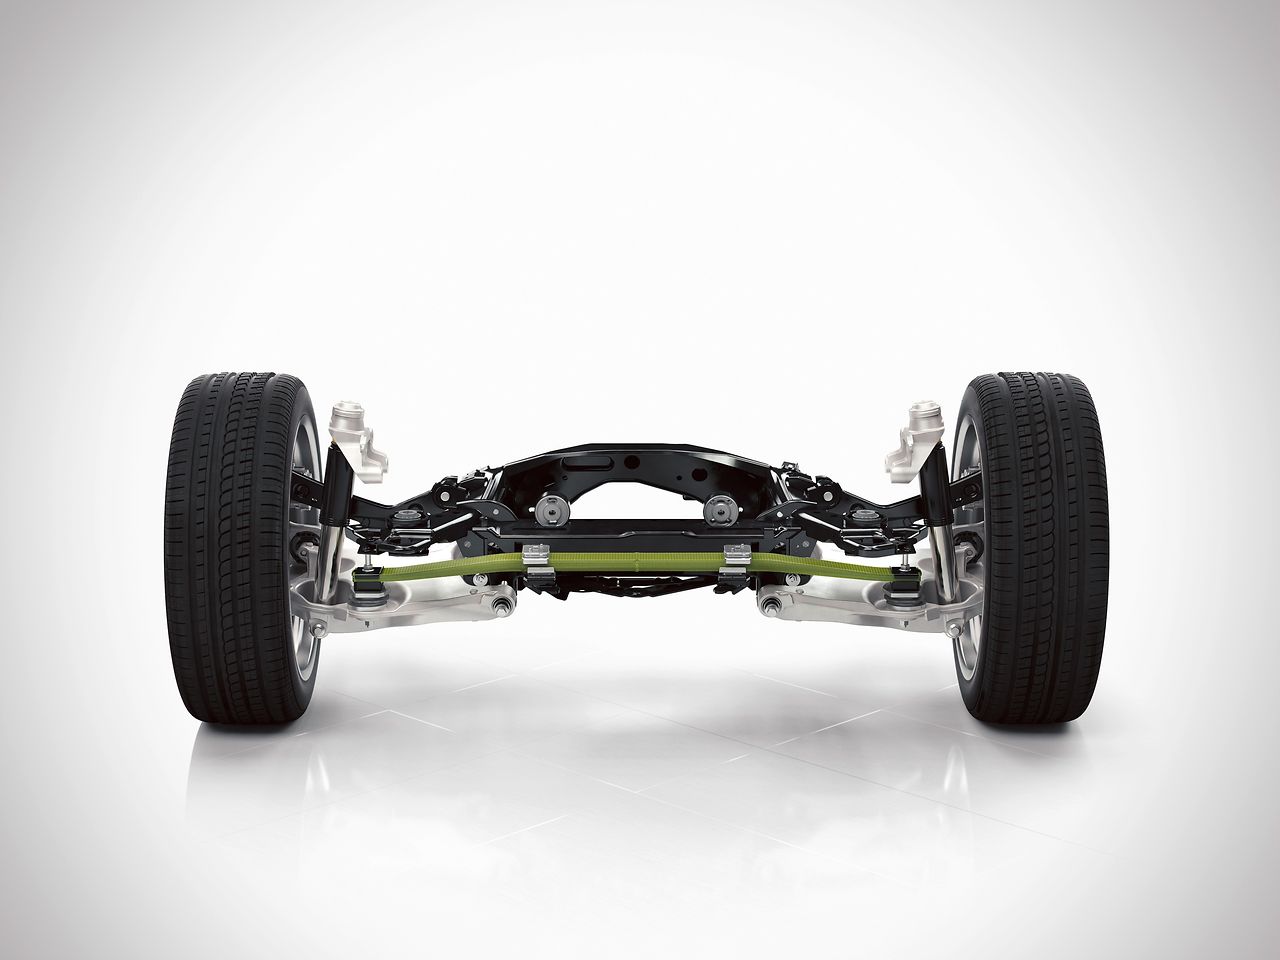 
The rear axle of the new Volvo XC90 features a new transverse leaf spring, made of lightweight composite material. Benteler-SGL mass-produces the composite leaf springs for the rear suspension using Loctite MAX resin from Henkel.